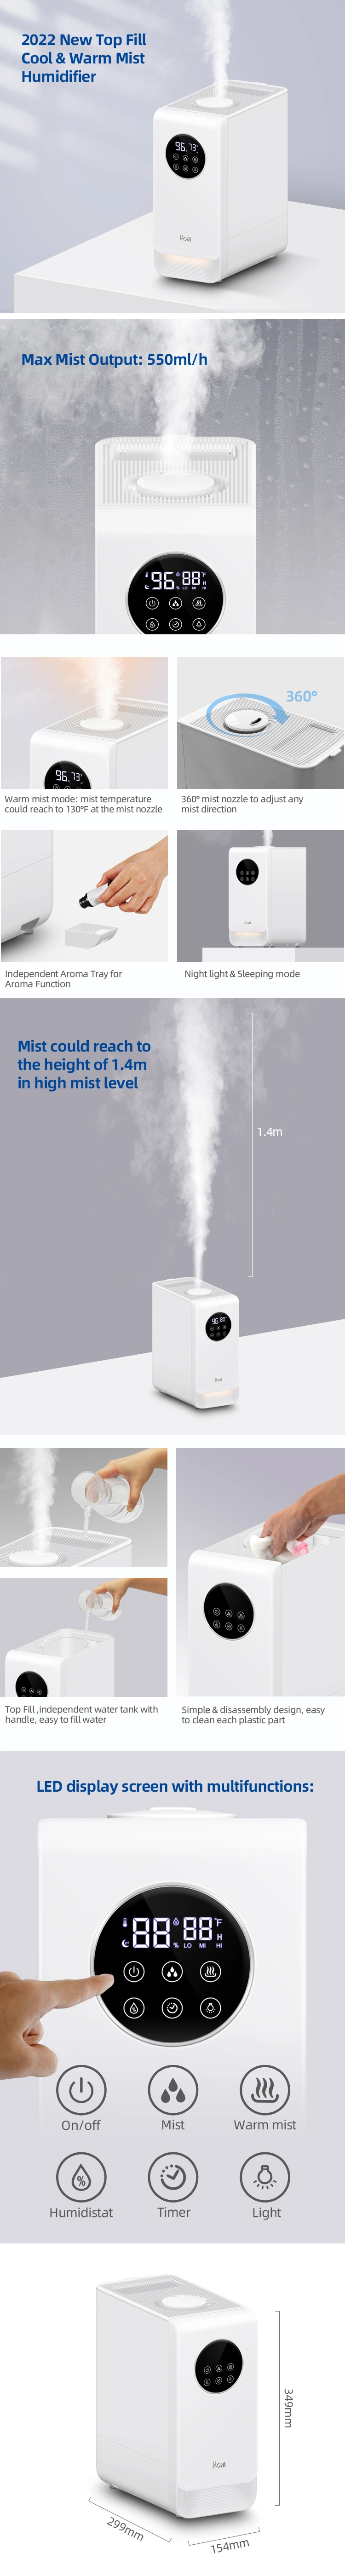 Go-2265h Smart WiFi Hybrid Cool and Warm Mist Large Capacity 6.5L Aroma Air Purifier Diffuser Humidifier with LED Aromatherapy Light